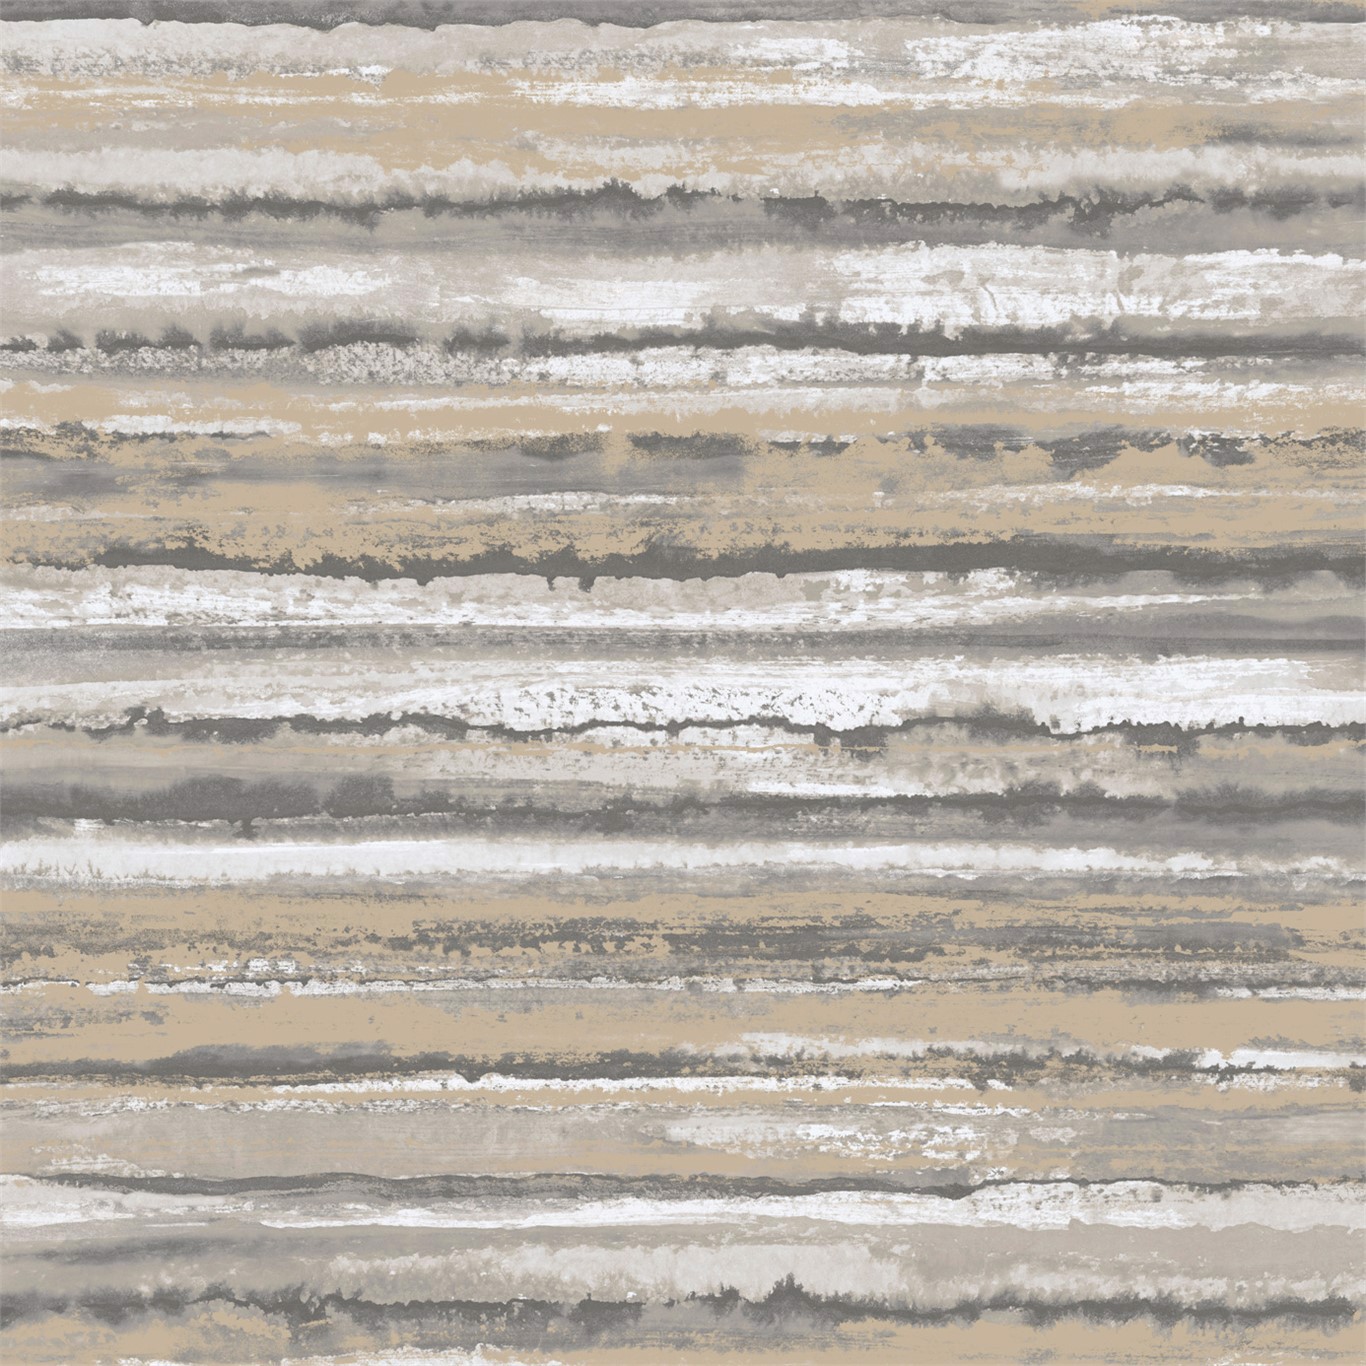 Anthology Therassia Botswana Agate Wallpaper by HAR